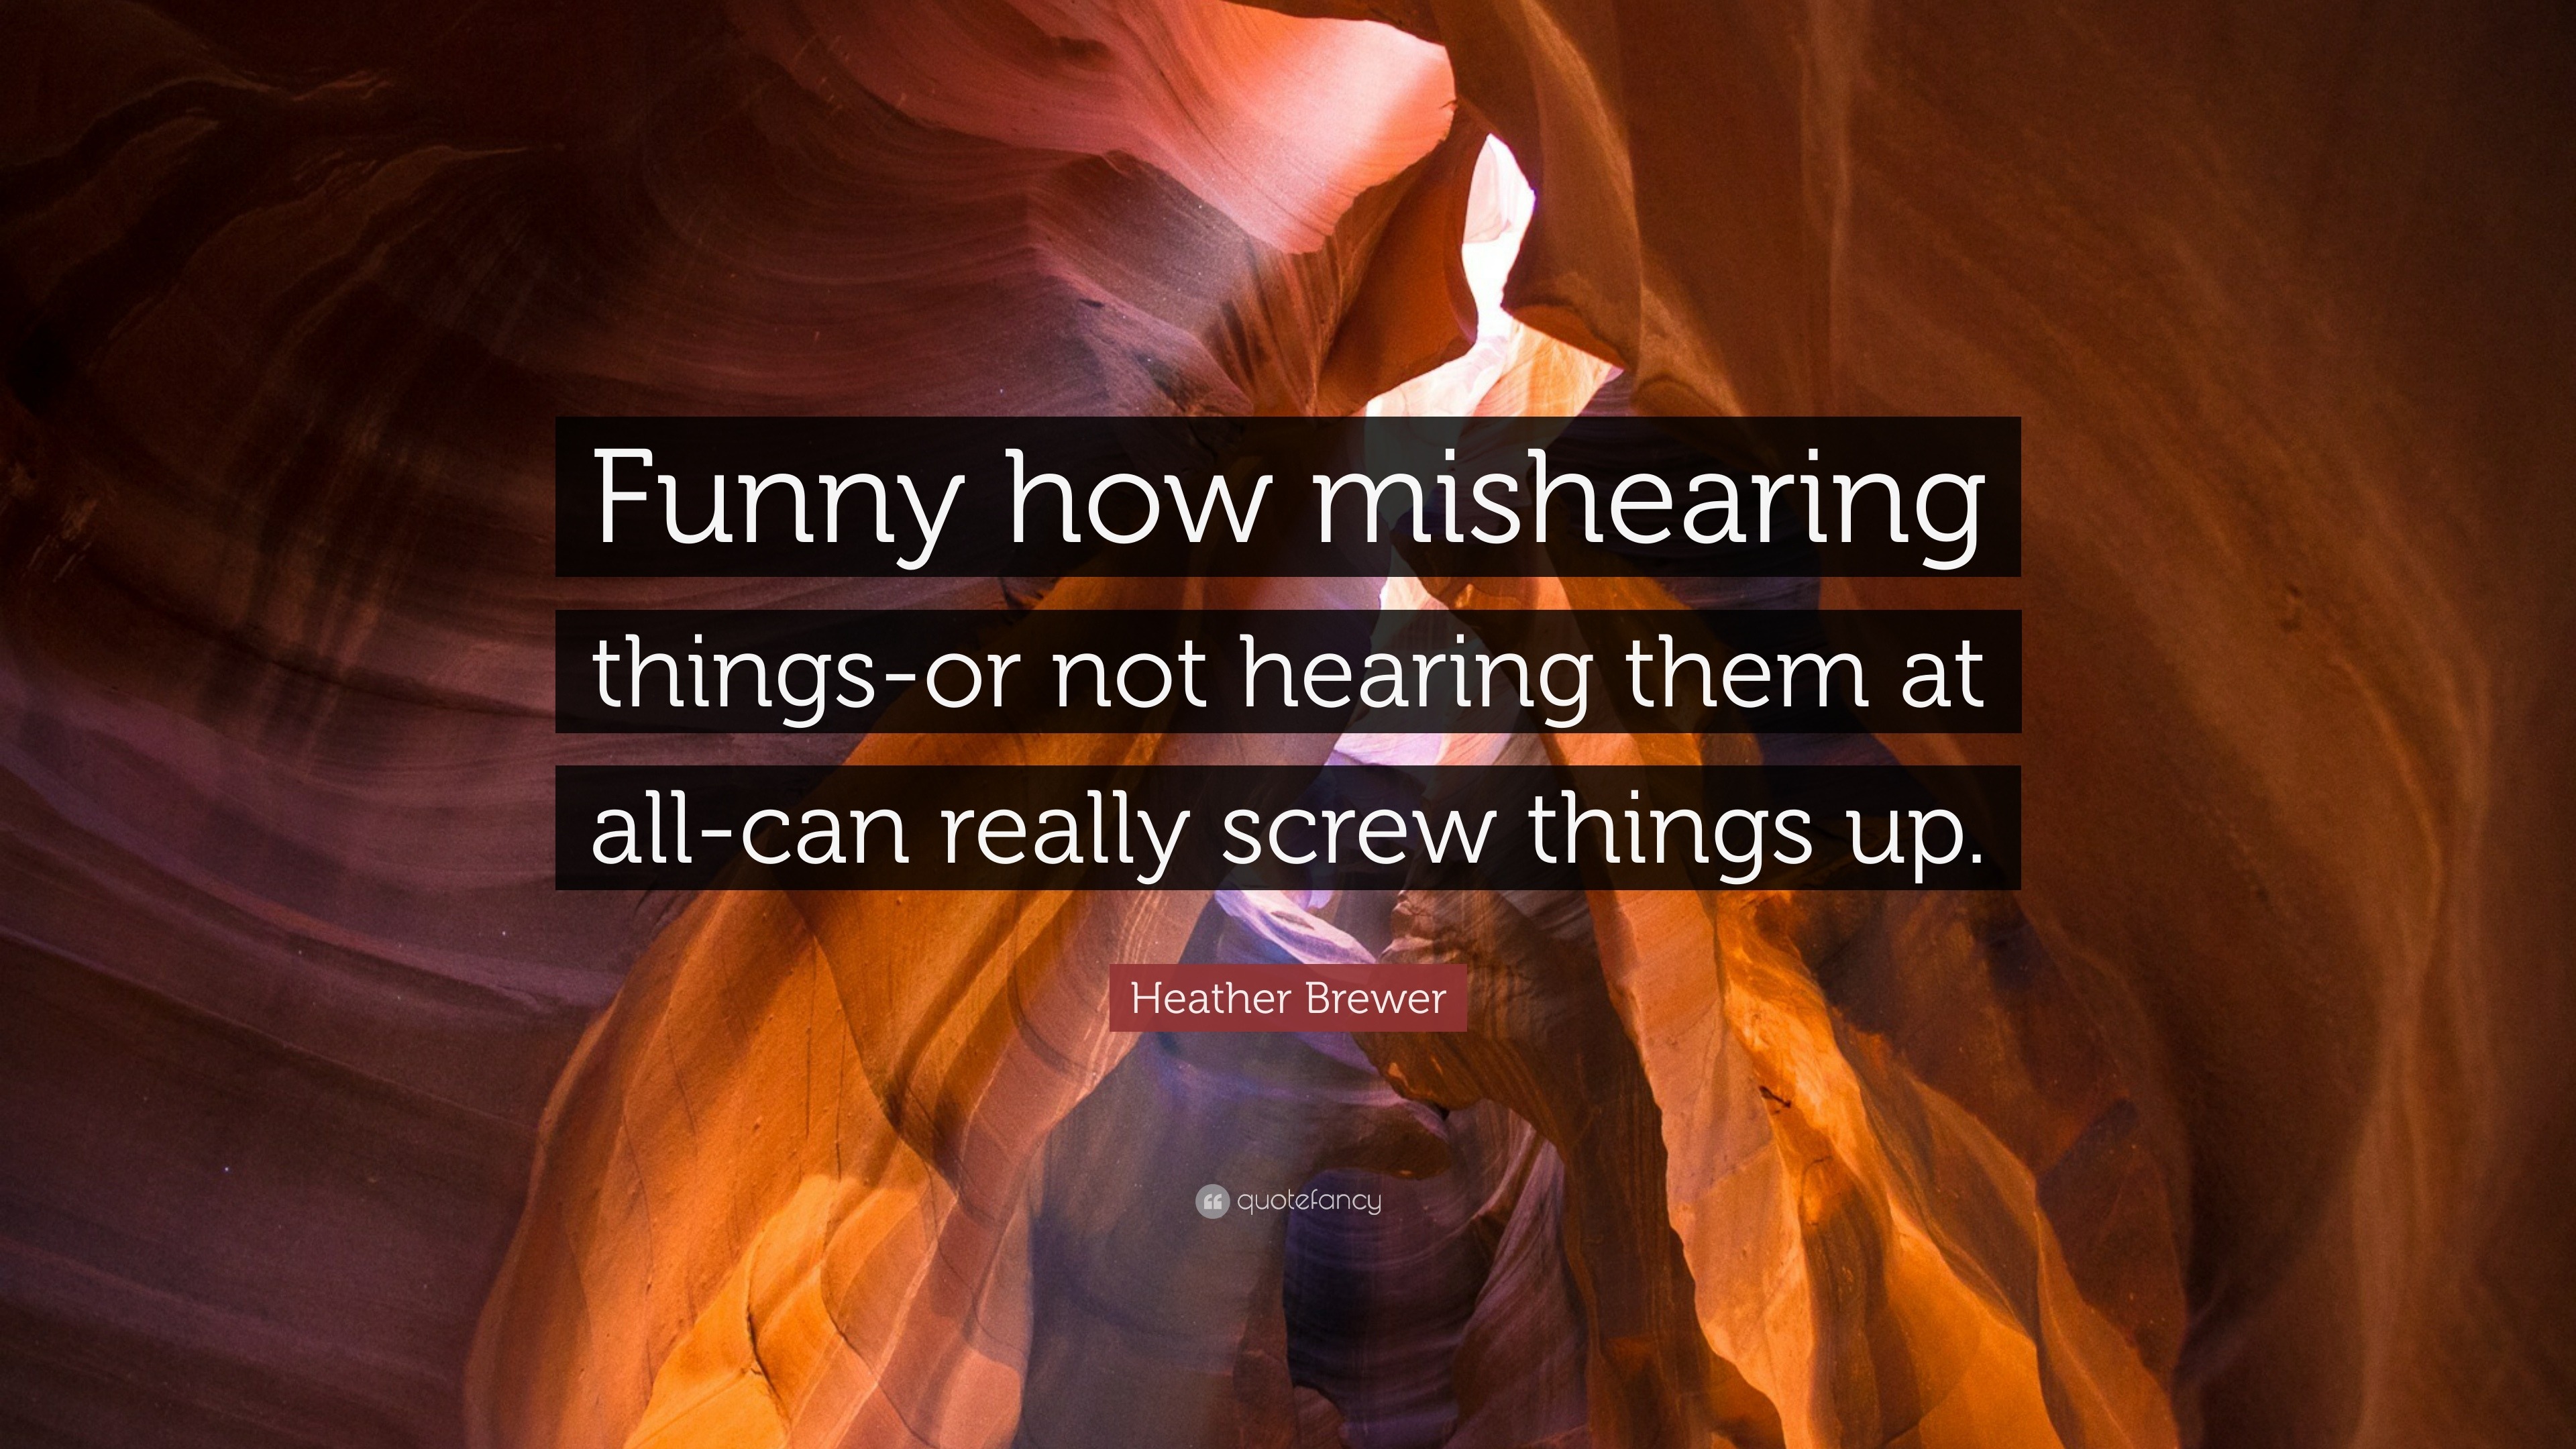 Heather Brewer Quote: “Funny how mishearing things-or not hearing them at  all-can really screw